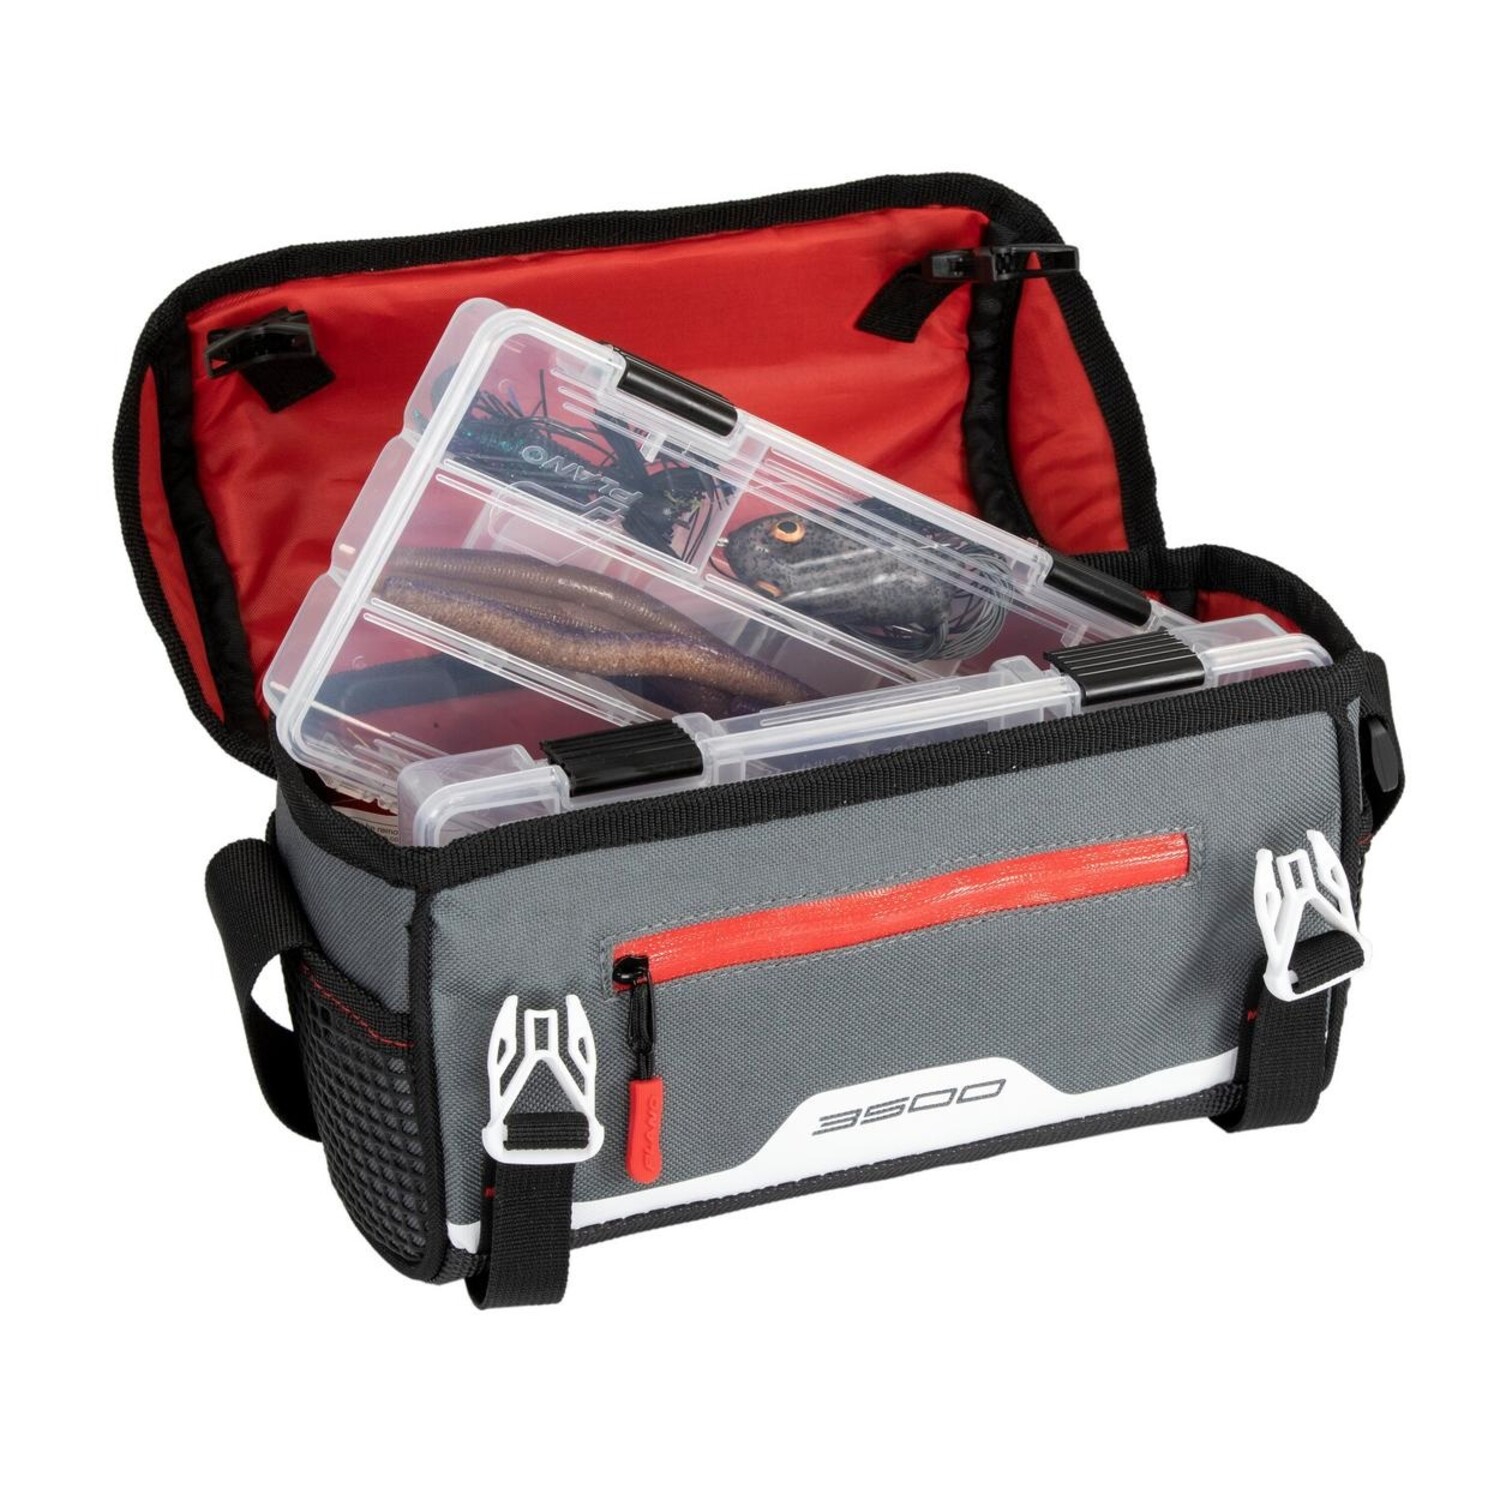 Plano 3600 SoftSider Tackle Bag Overview 